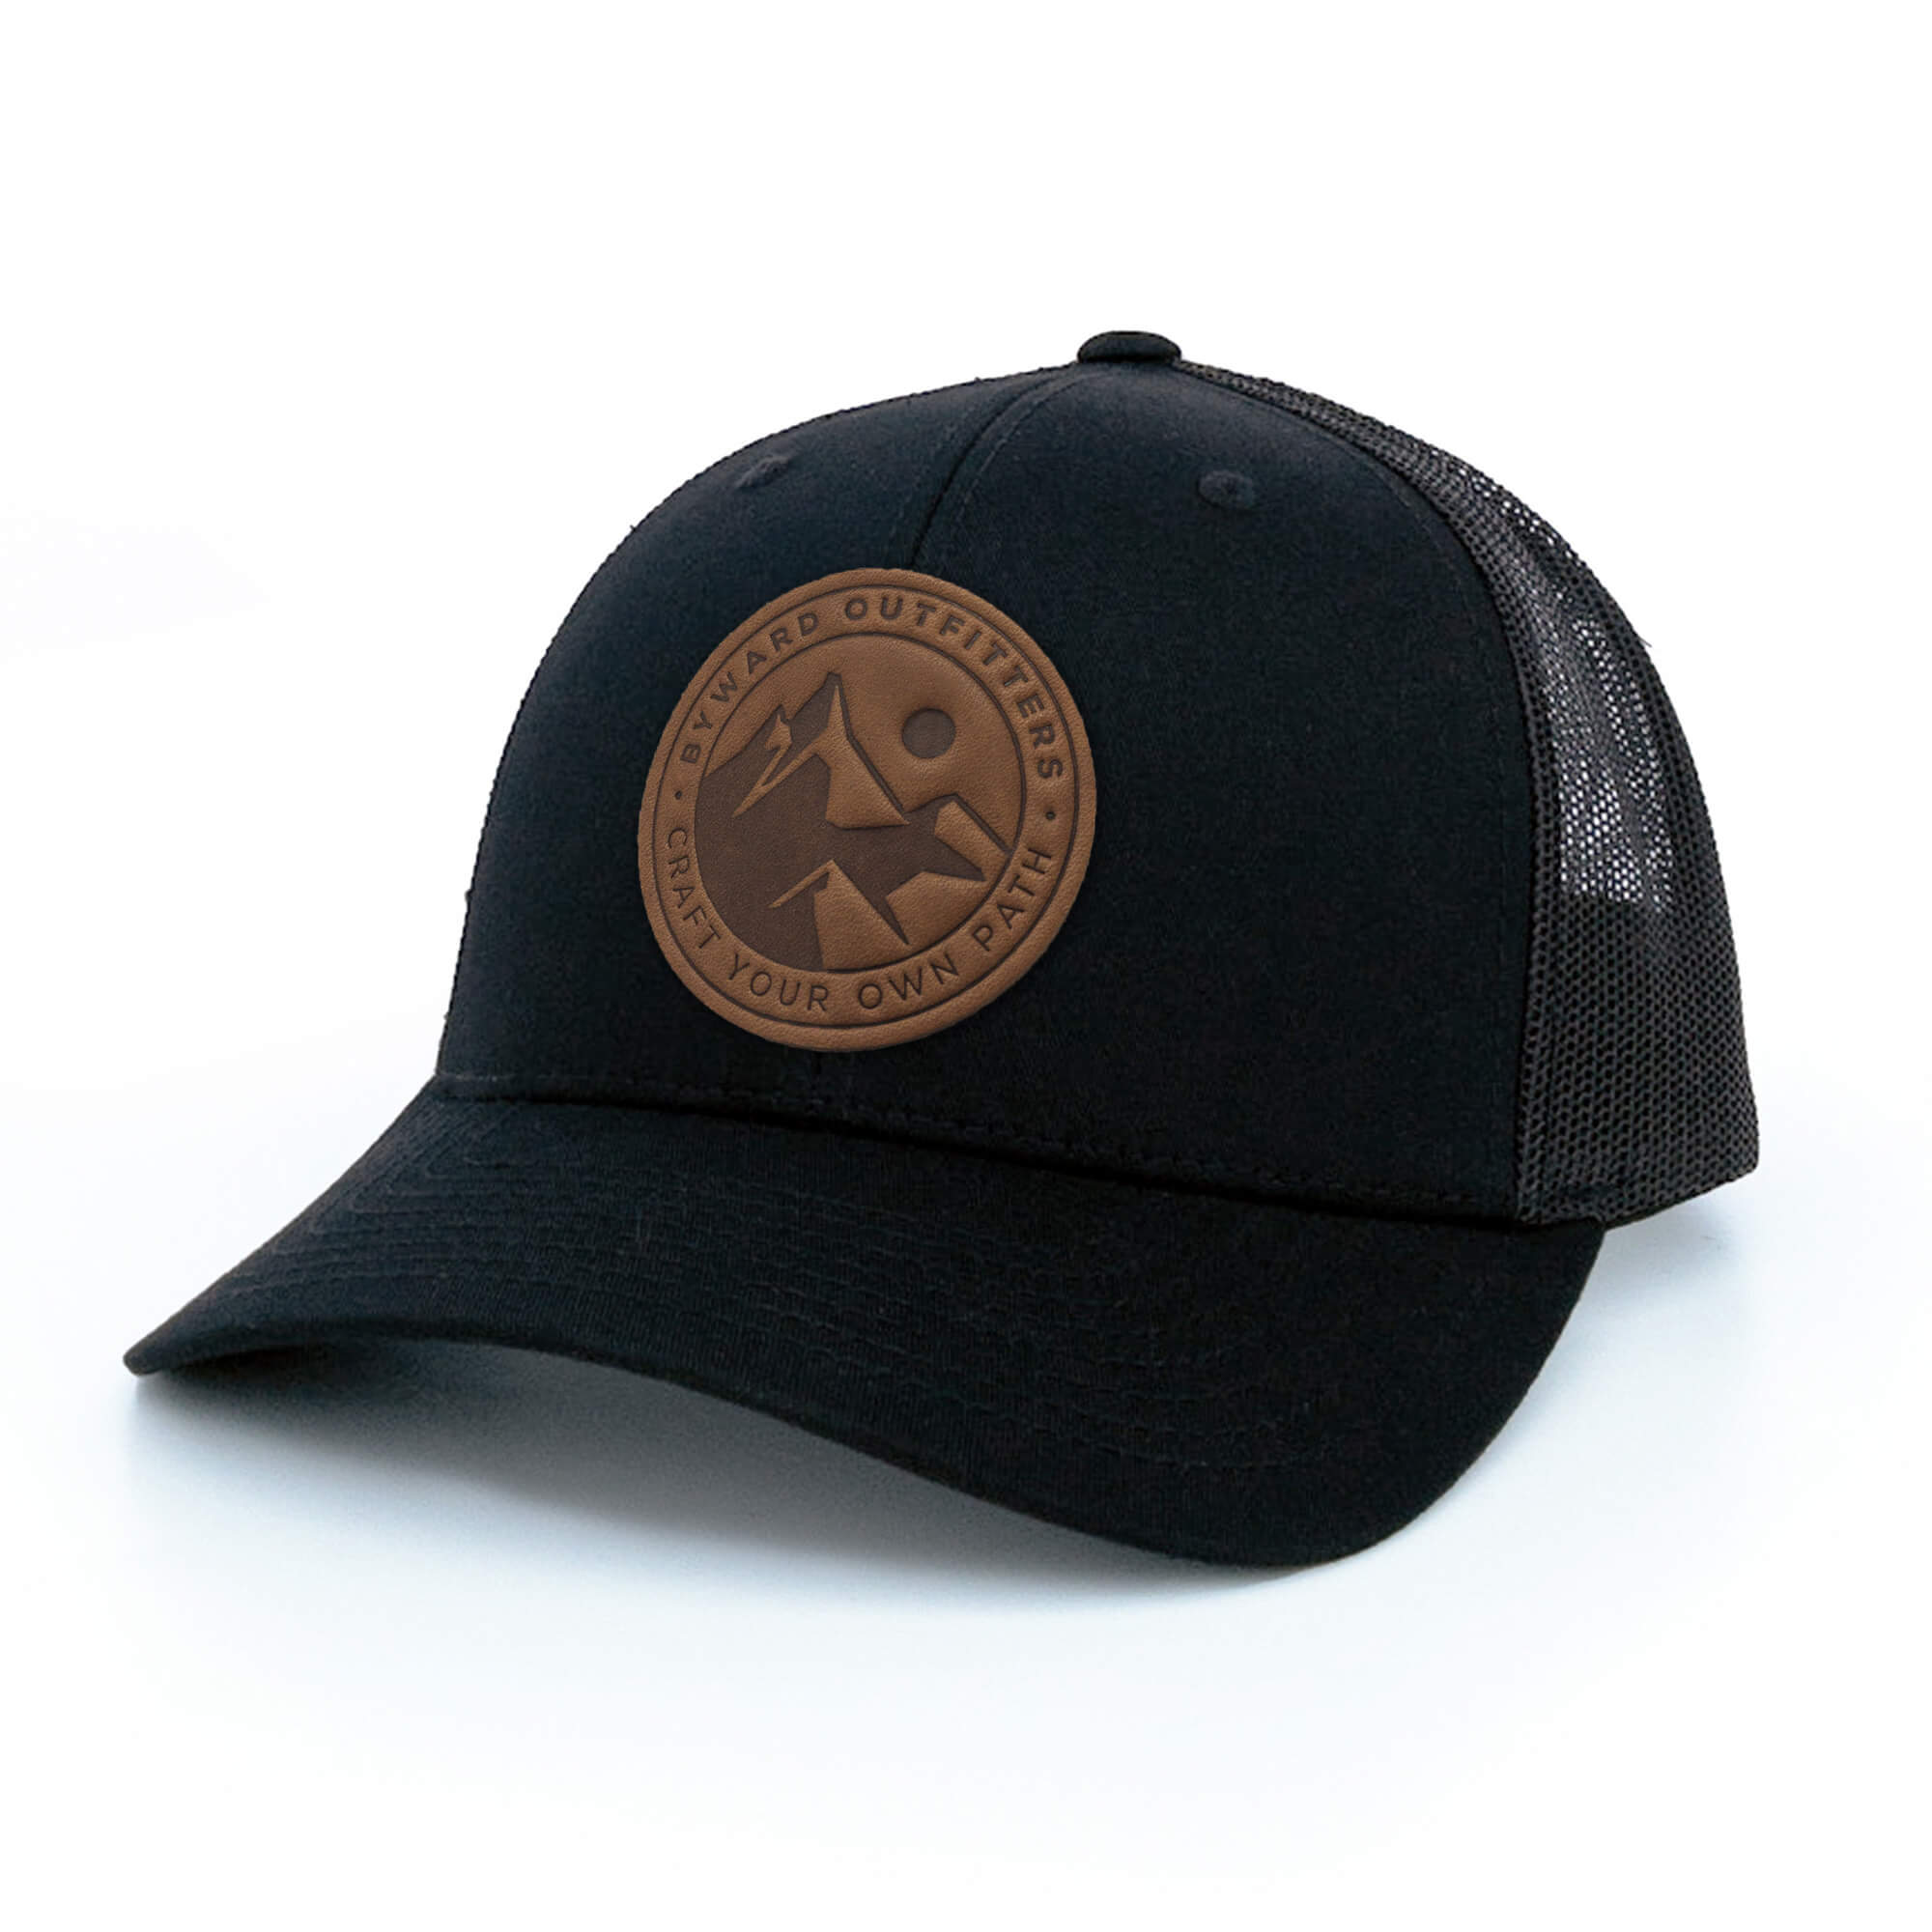 Black trucker hat with full-grain leather patch of a Mountain Escape | BLACK-005-005, CHARC-005-005, NAVY-005-005, HGREY-005-005, MOSS-005-005, BROWN-005-005